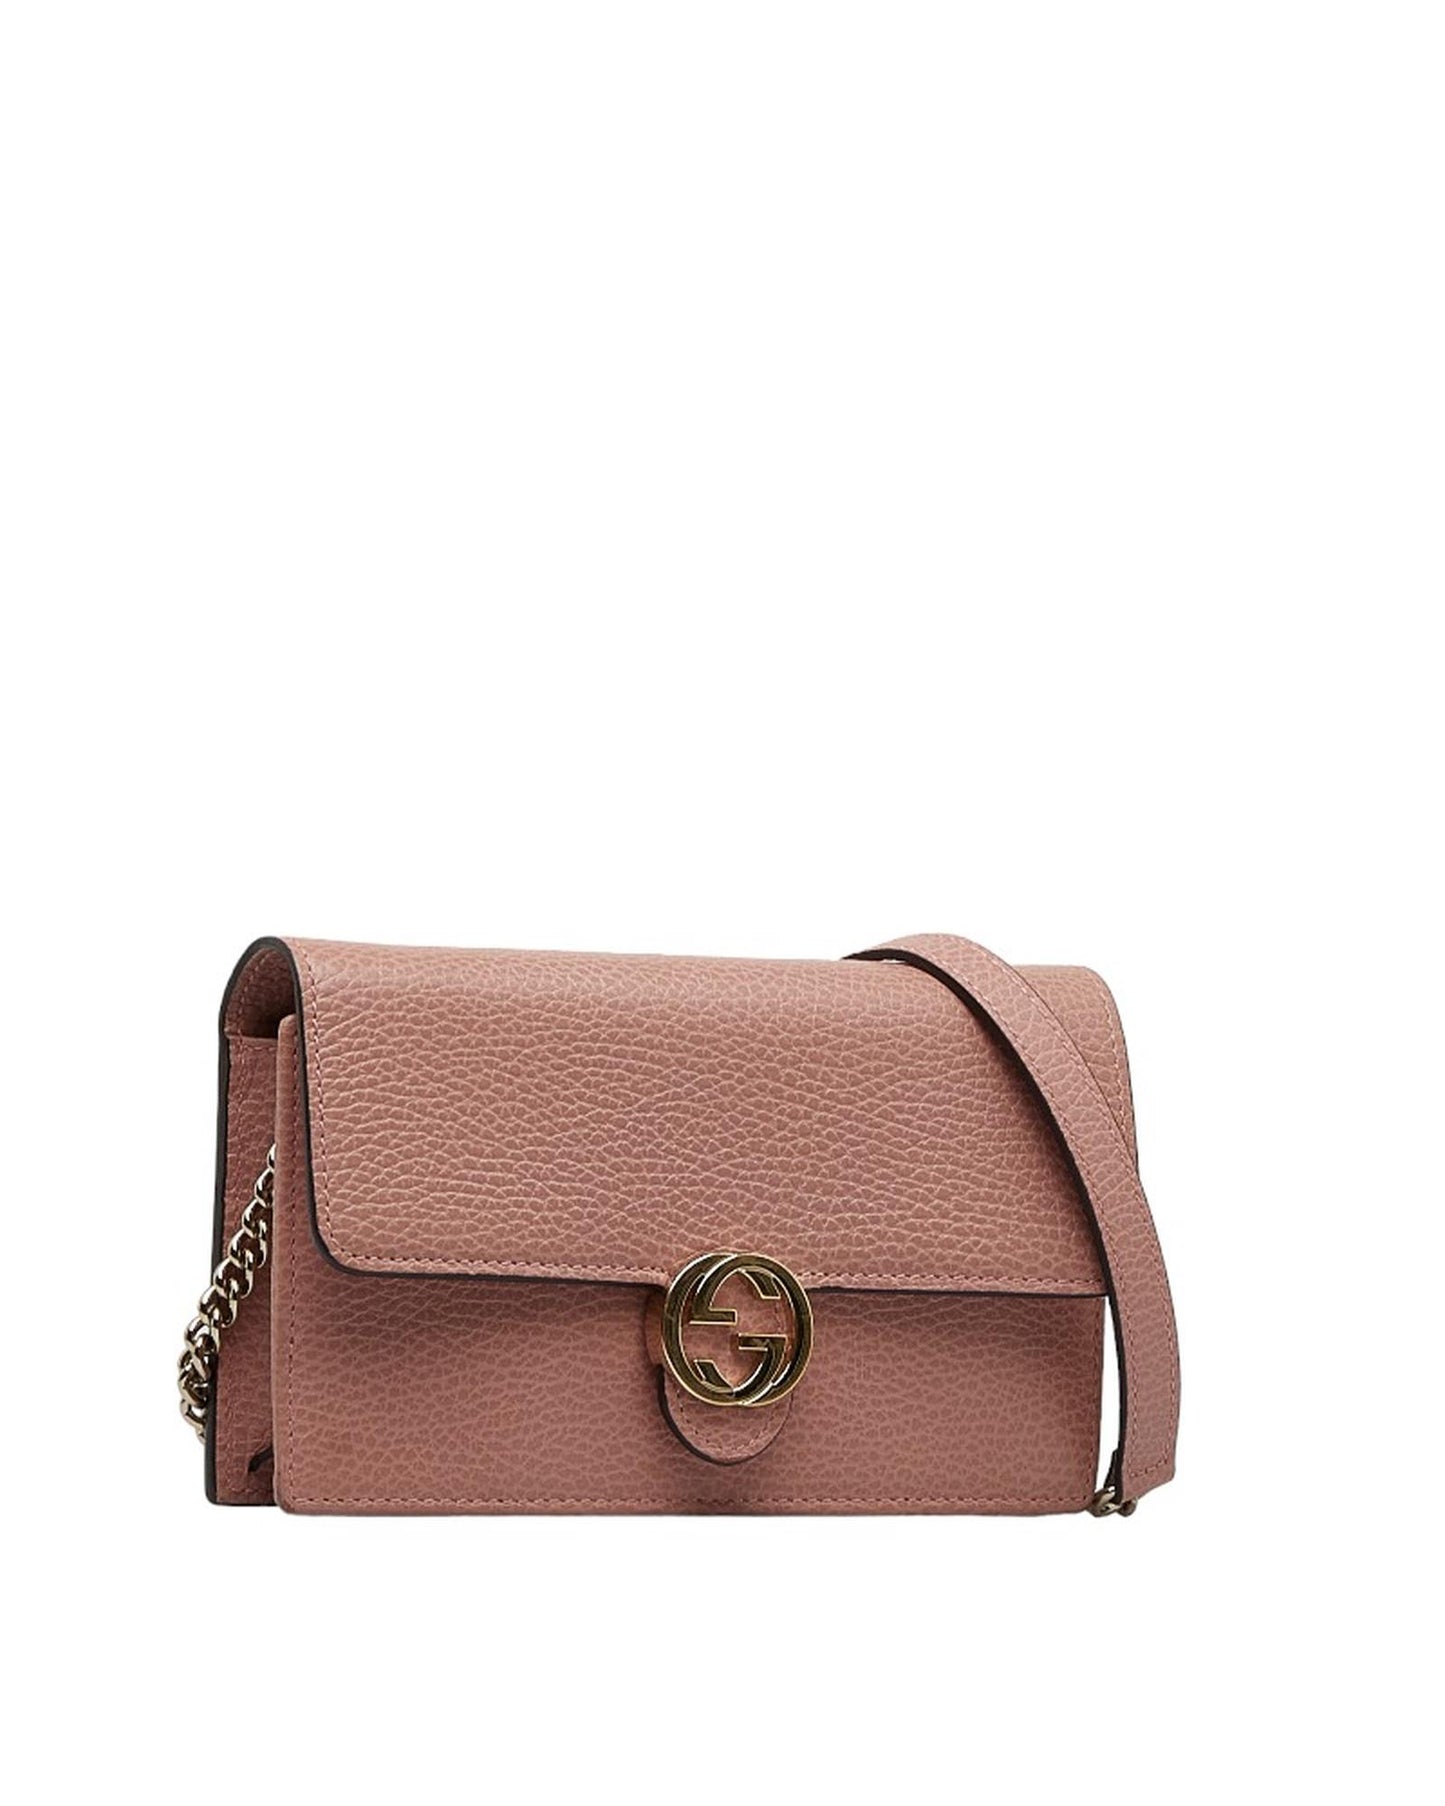 Gucci Women's Interlocking G Leather Wallet On Chain Bag in Pink